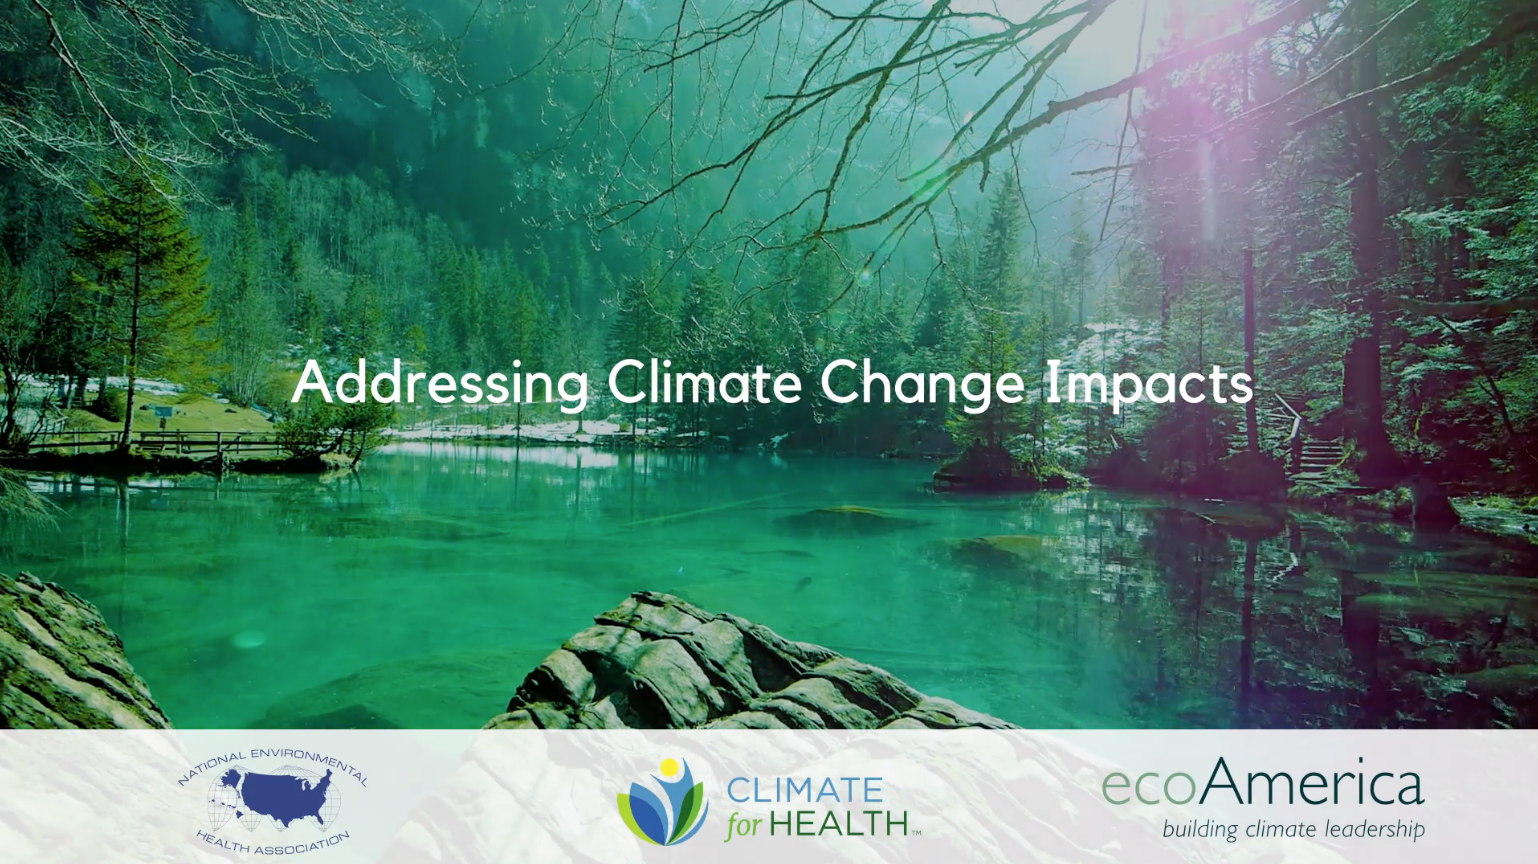 NEHA and Climate for Health Release New Video Addressing Climate Change Impacts & Solutions